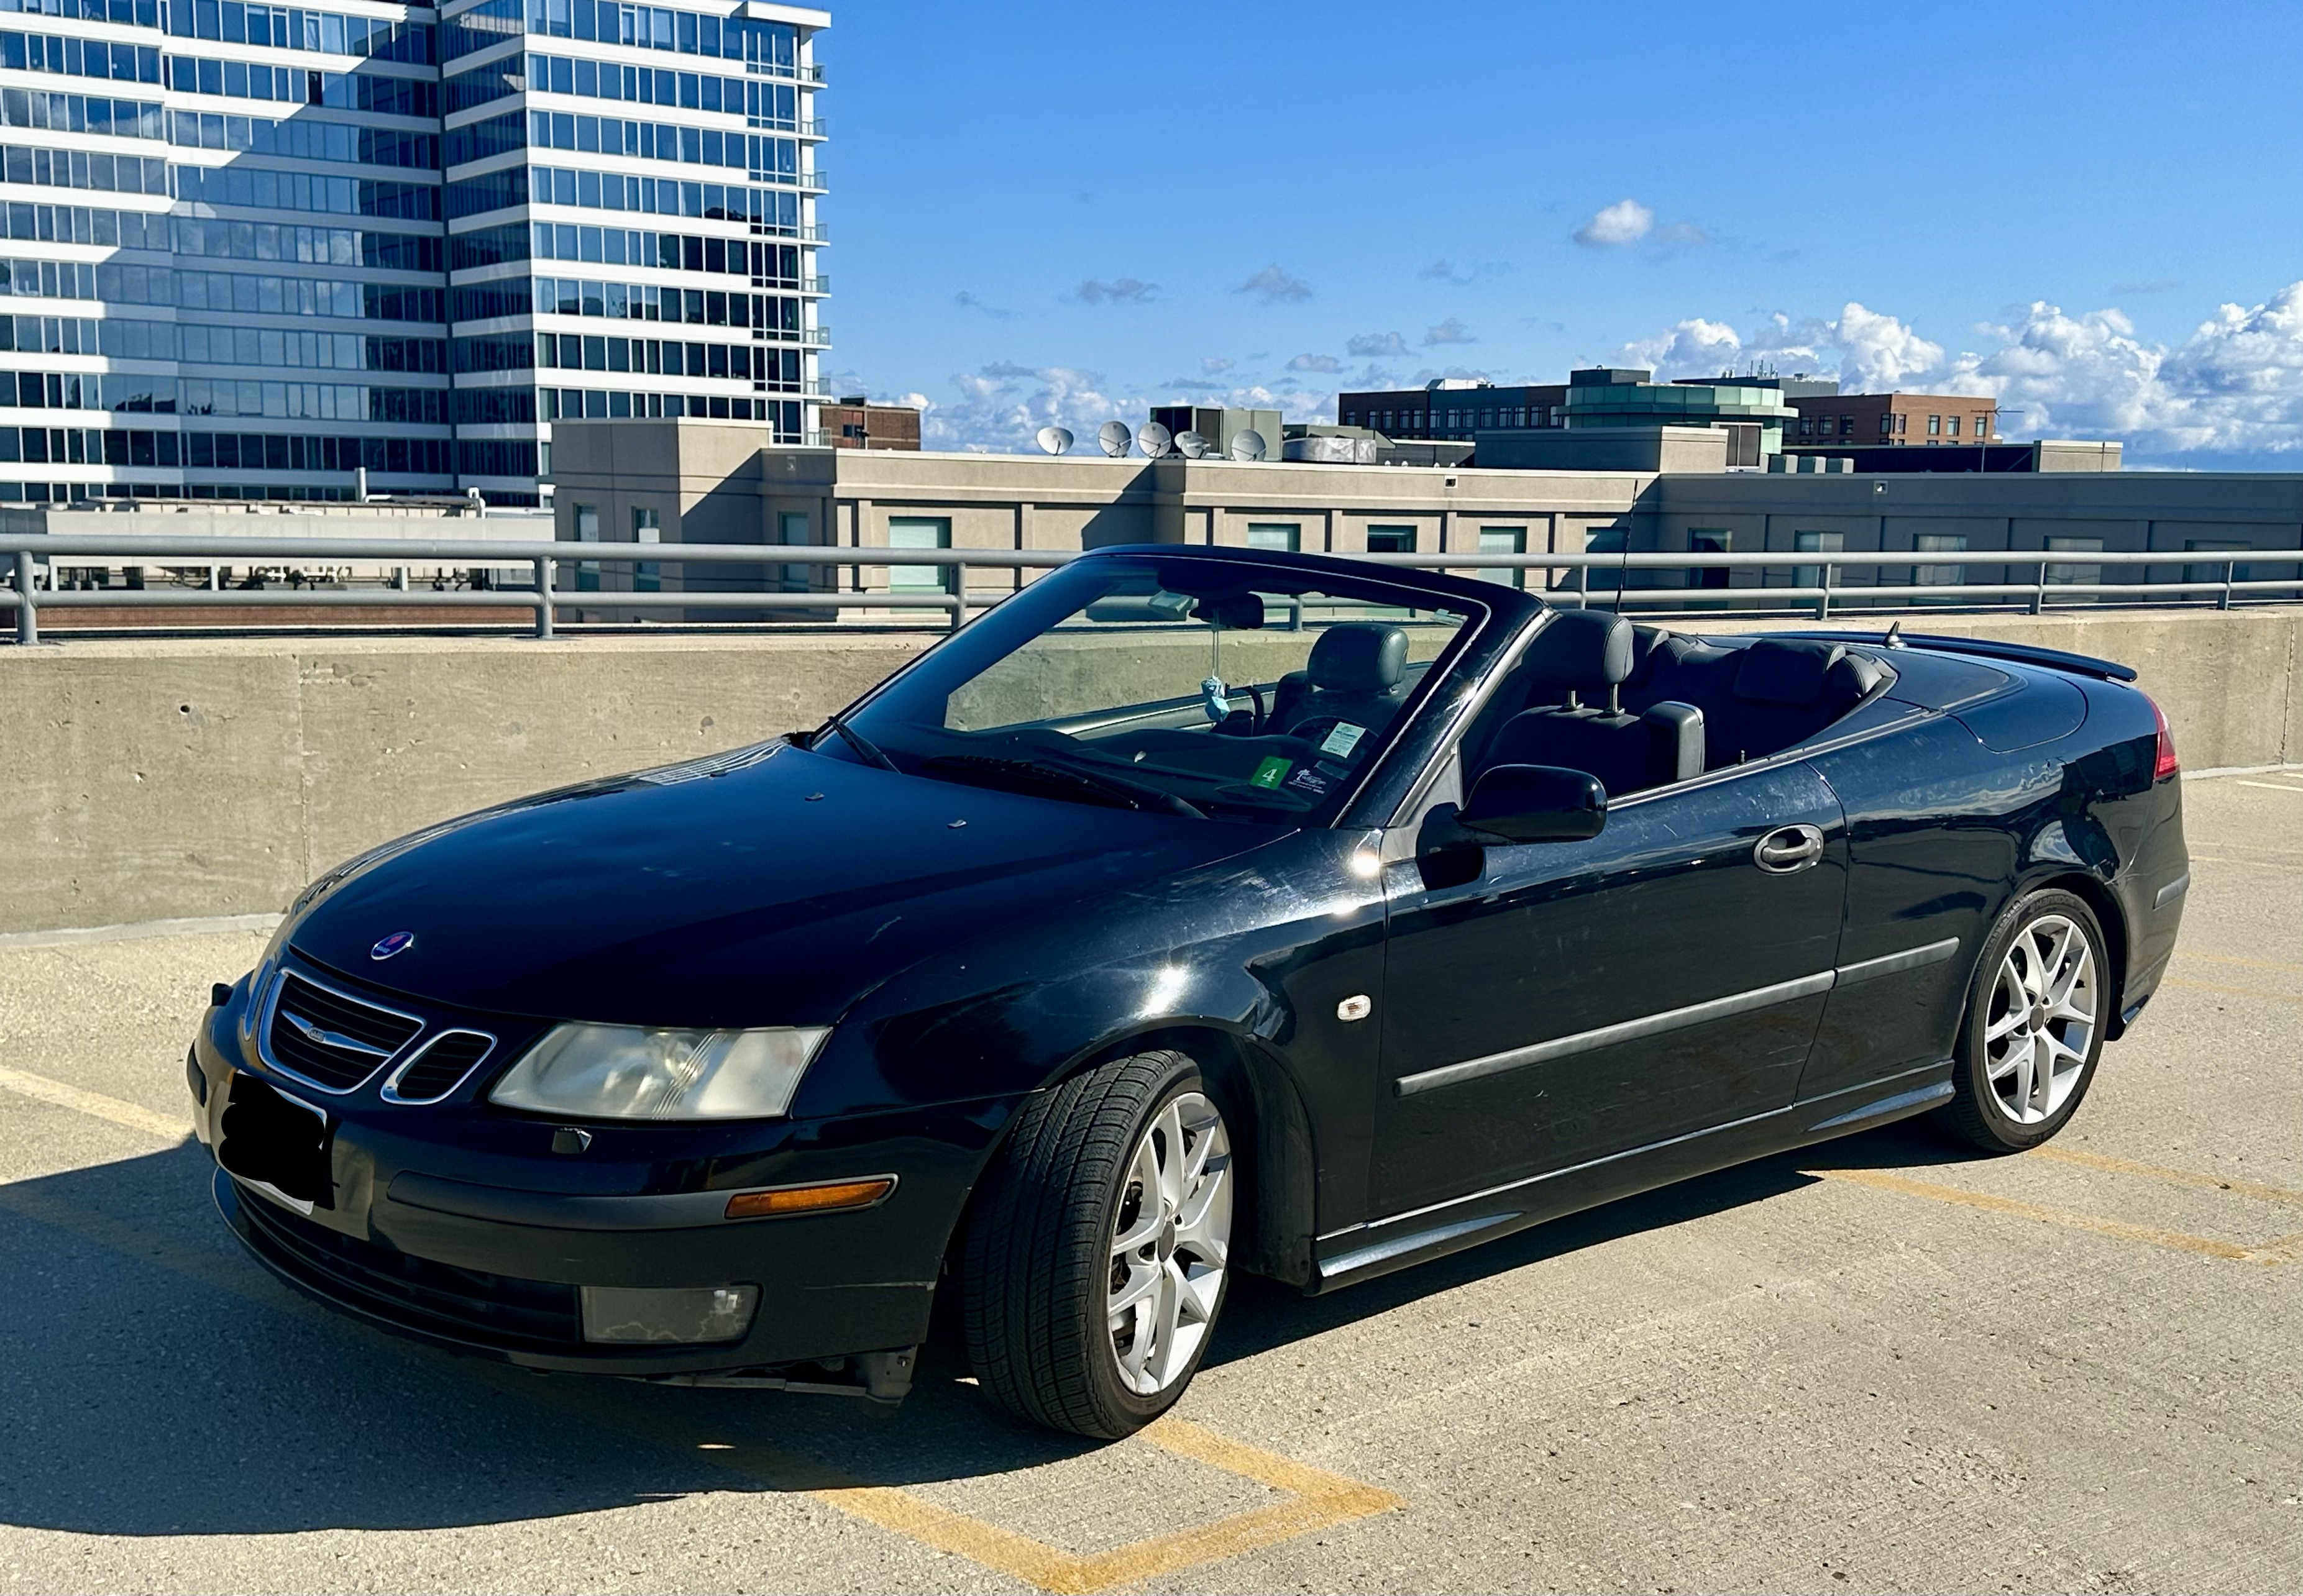 Used Saab 9-3 Convertible Buyer's Guide